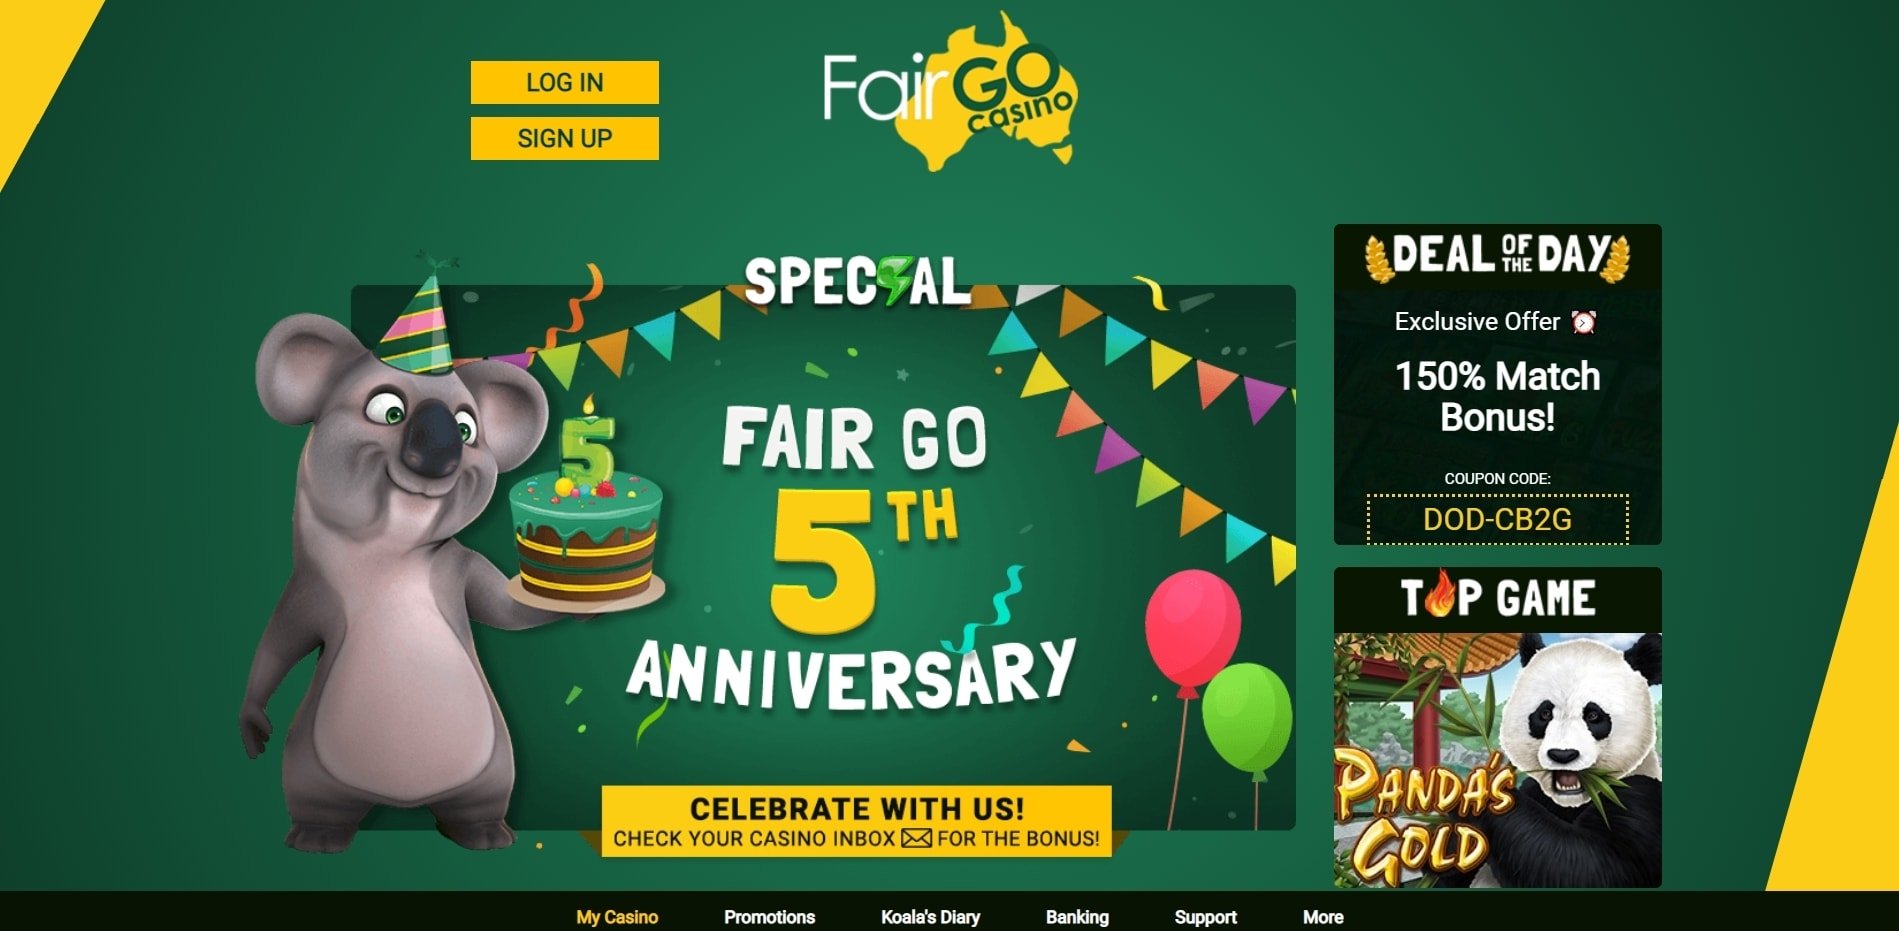 fairgo casino account signup to play and win